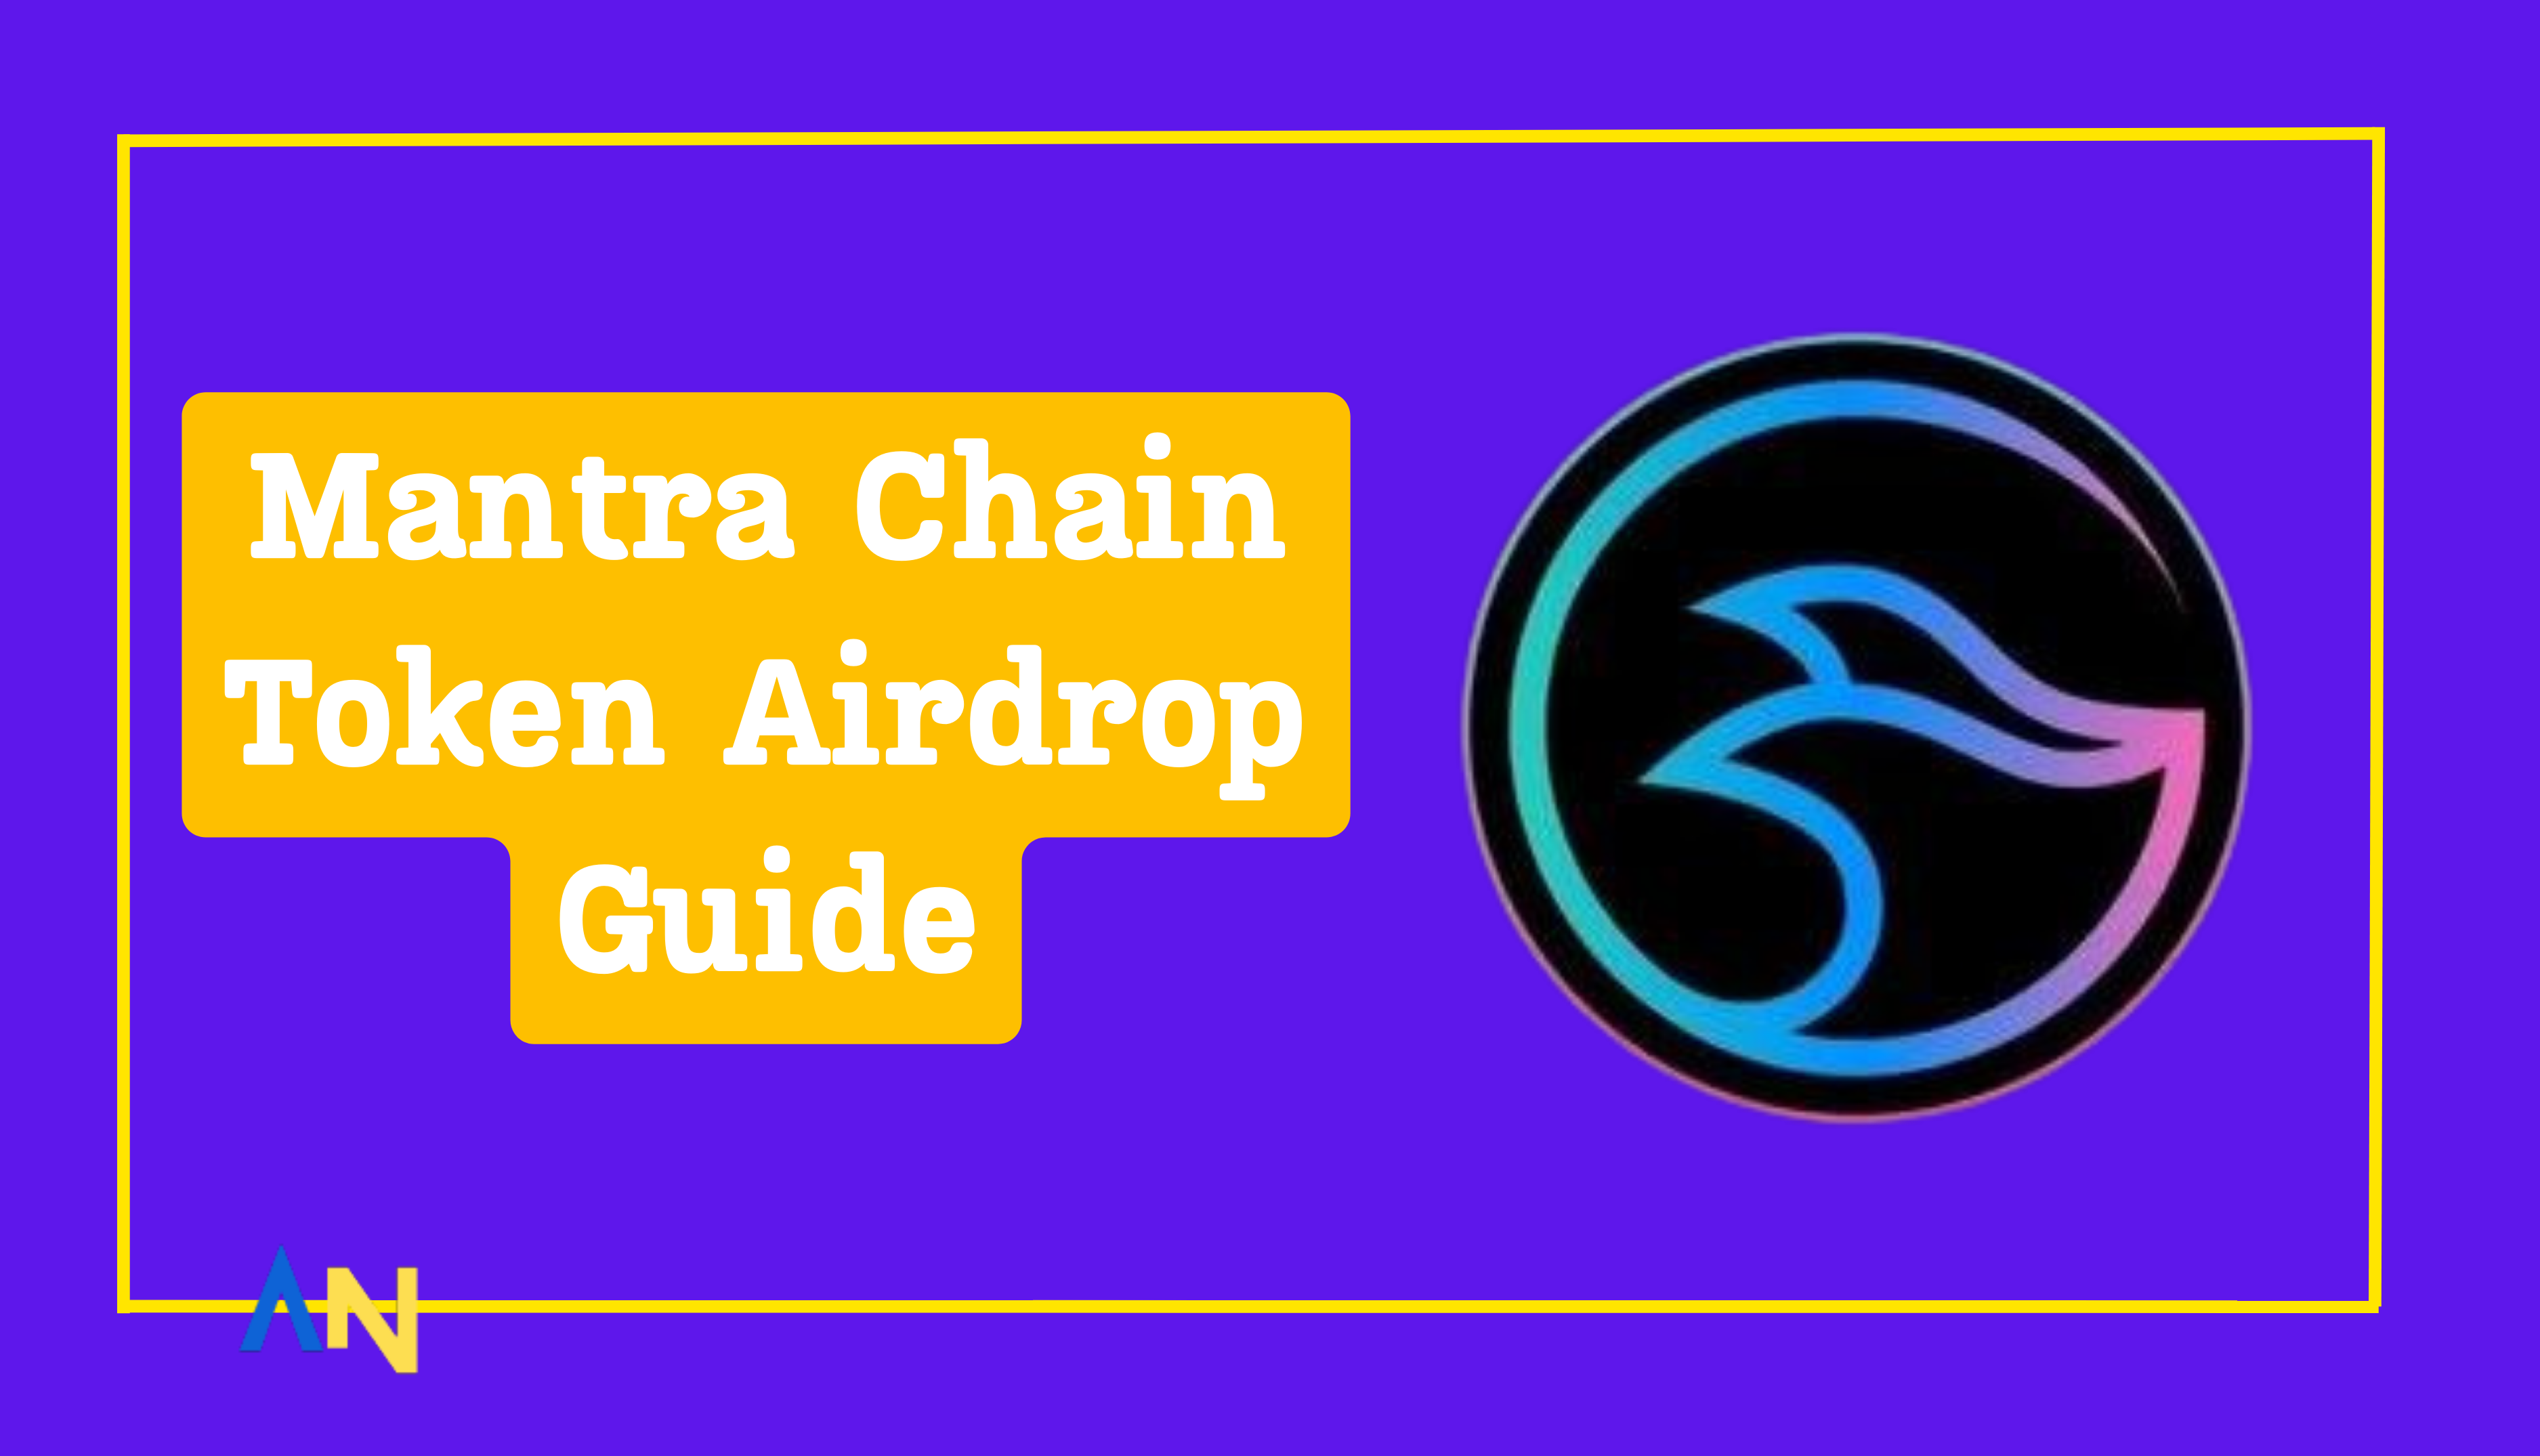 Mantra Chain Token Airdrop Guide